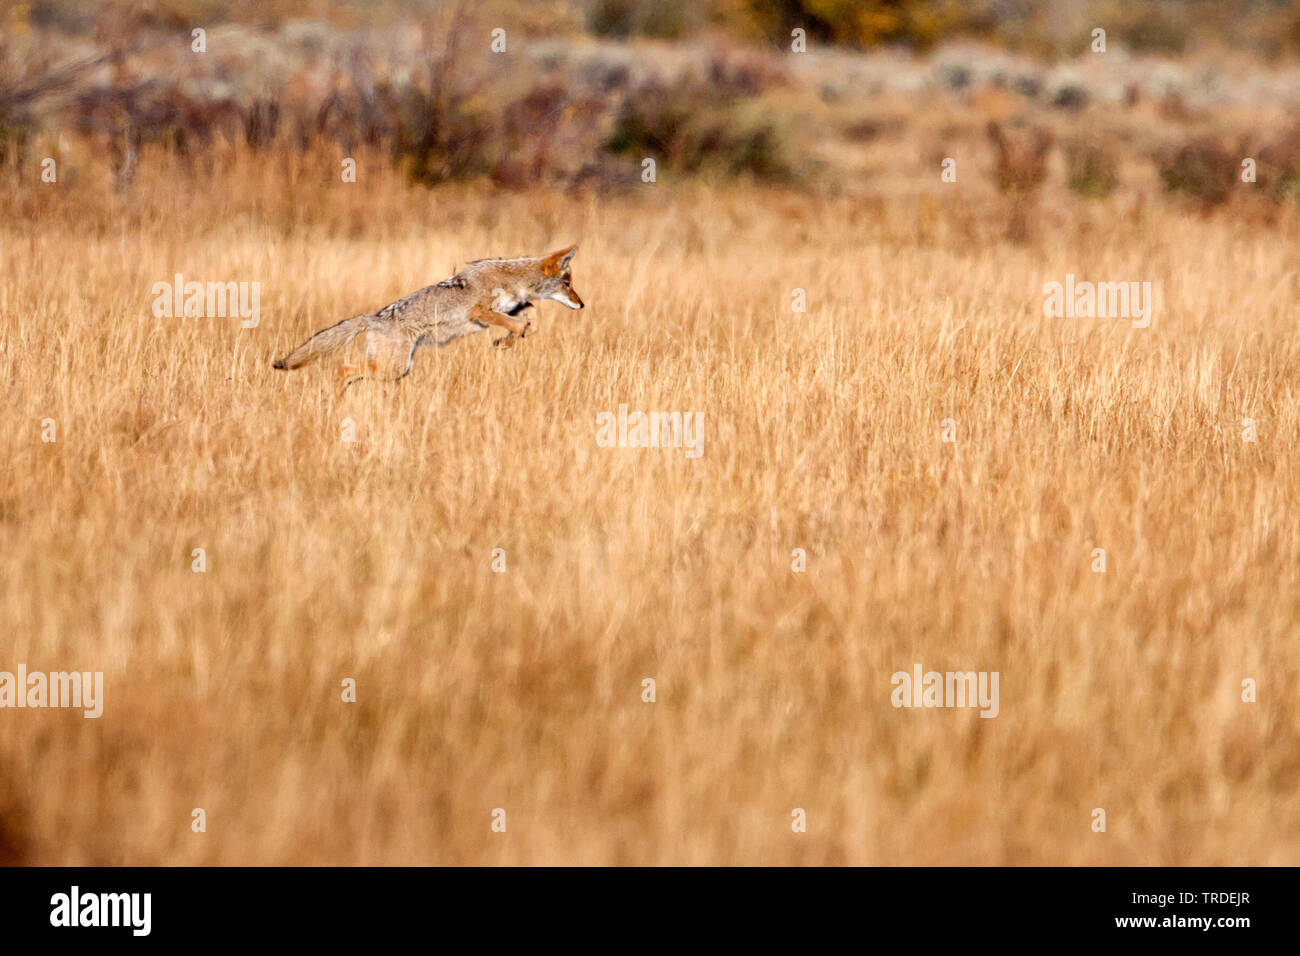 Le coyote (Canis latrans), chasse, USA, Wyoming, Grand Teton National Park Banque D'Images